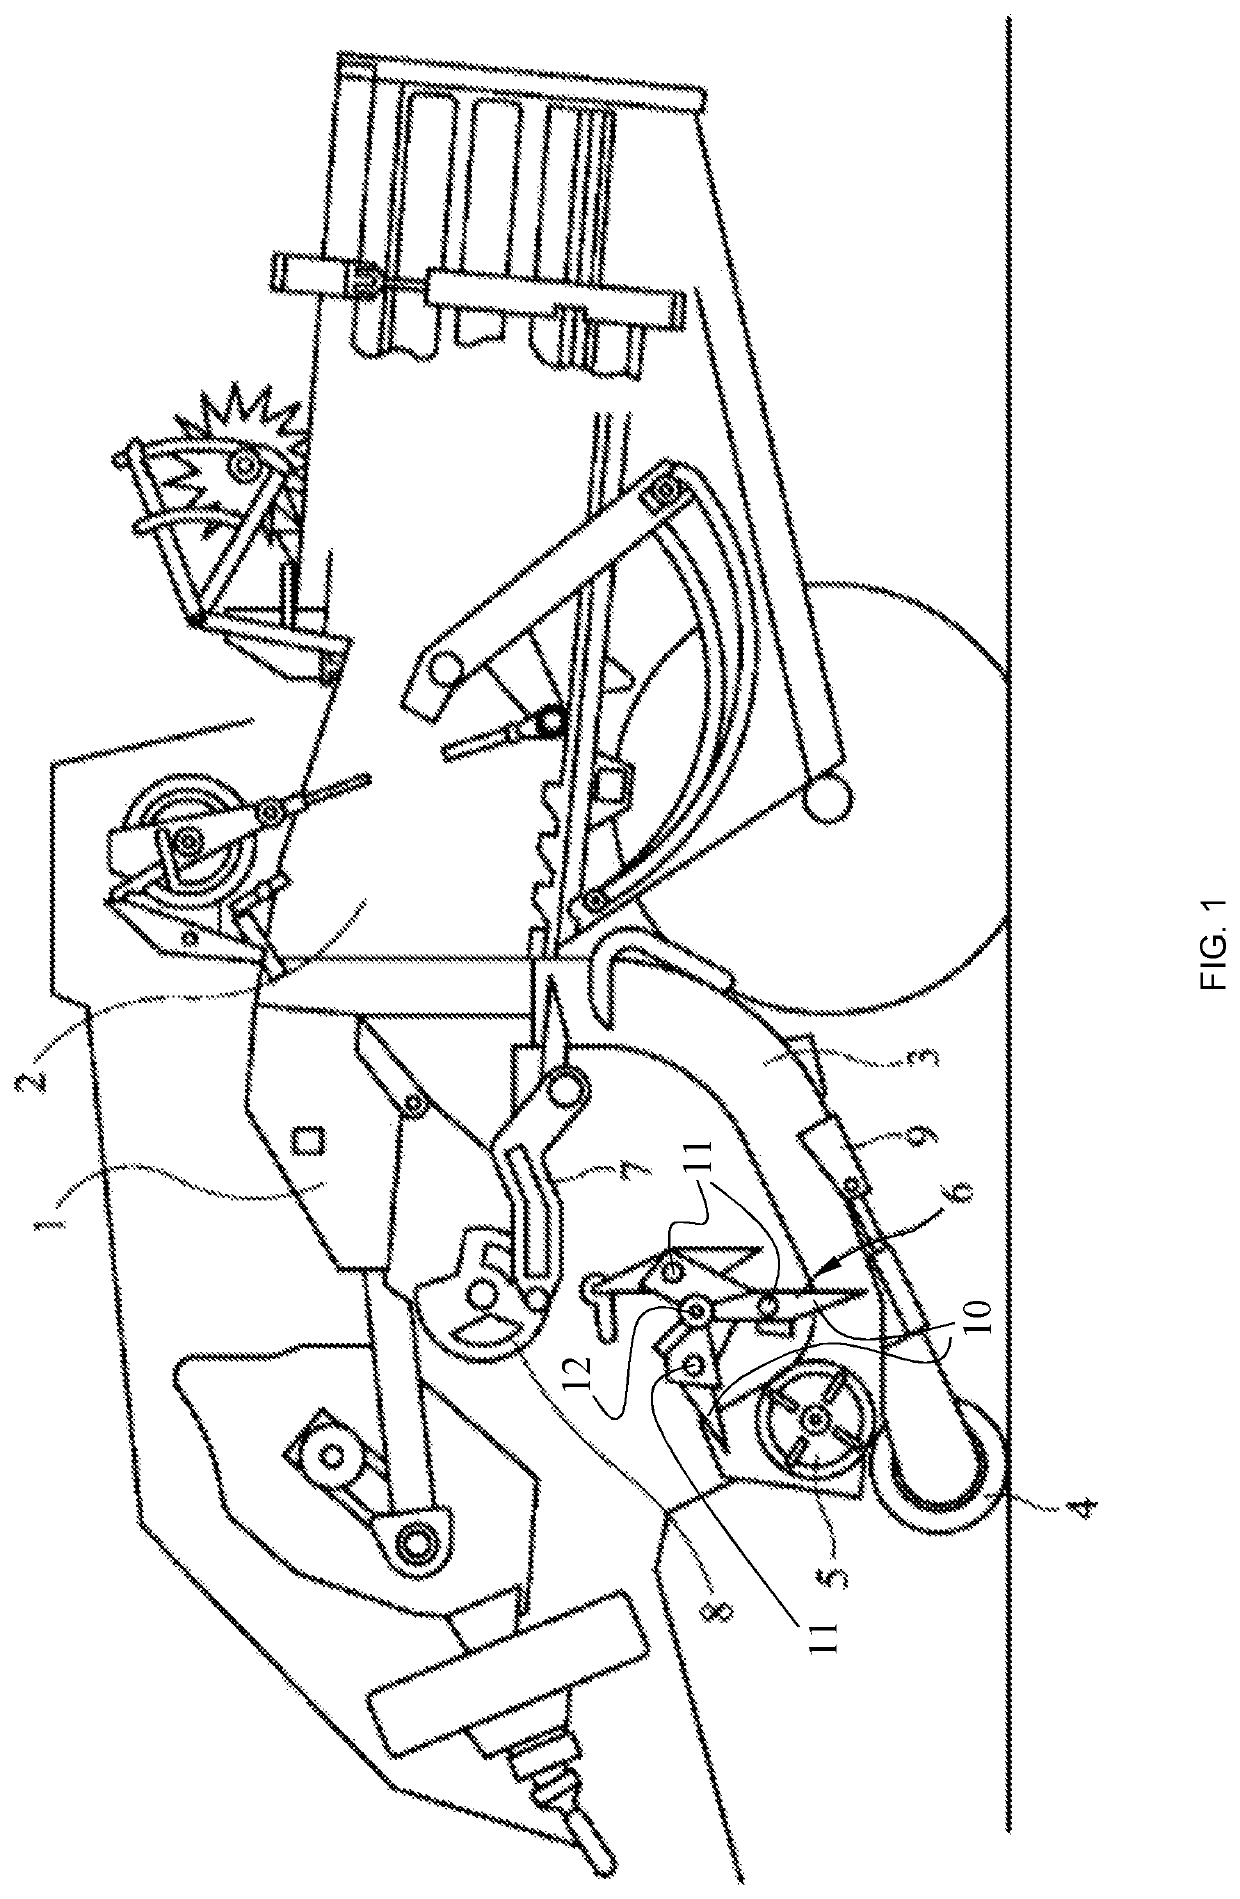 Statically balanced crank-operated packer mechanism for an agricultural baler